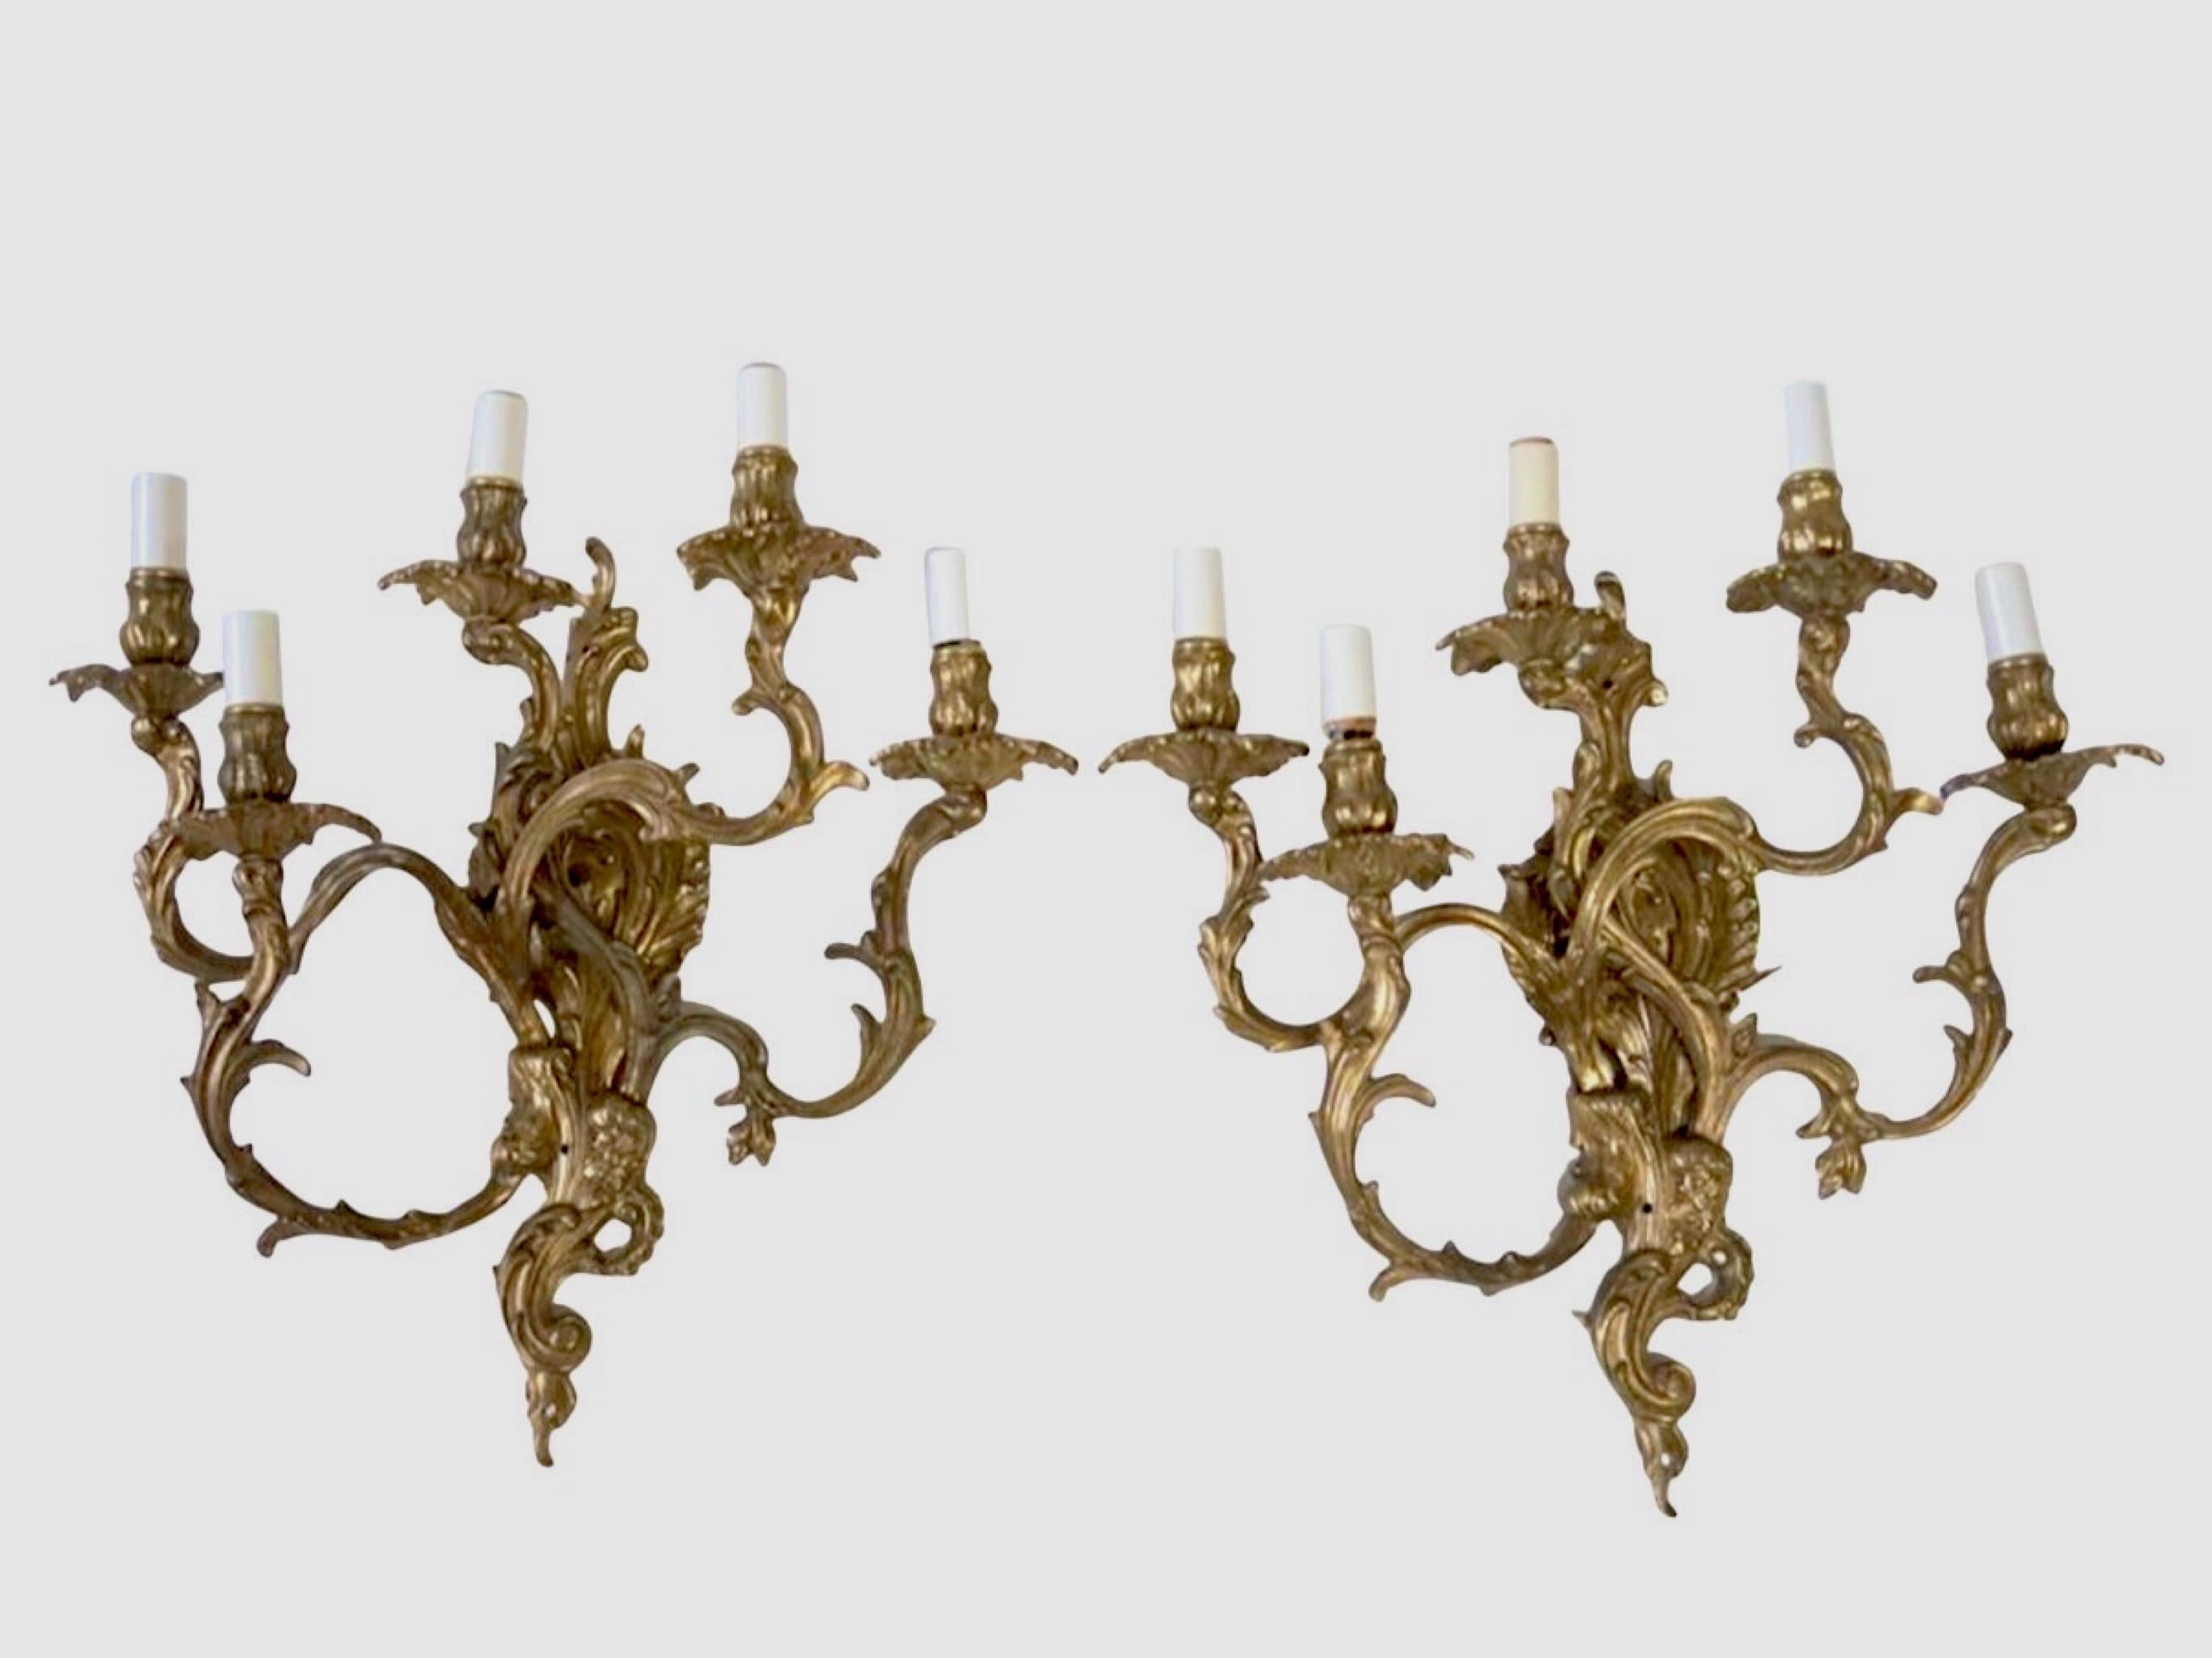 19th Century French Rococo 5 Arm Wired Wall Sconces - a Pair For Sale 9